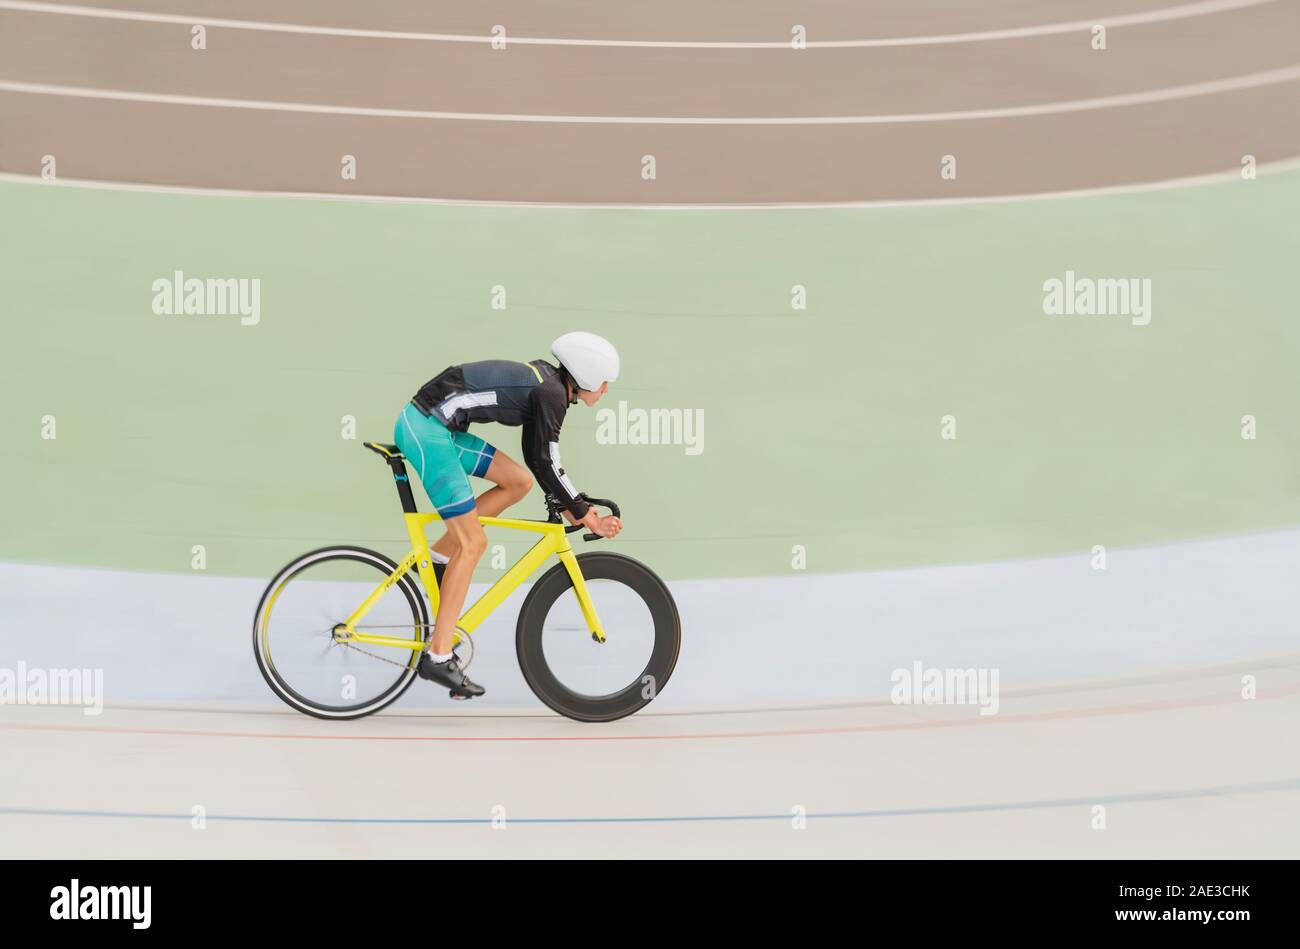 Young man cyclist rides on bike track in athletic wear and helmet at high speed during  bicycling sports competition, close up. Horisontal image. Stock Photo